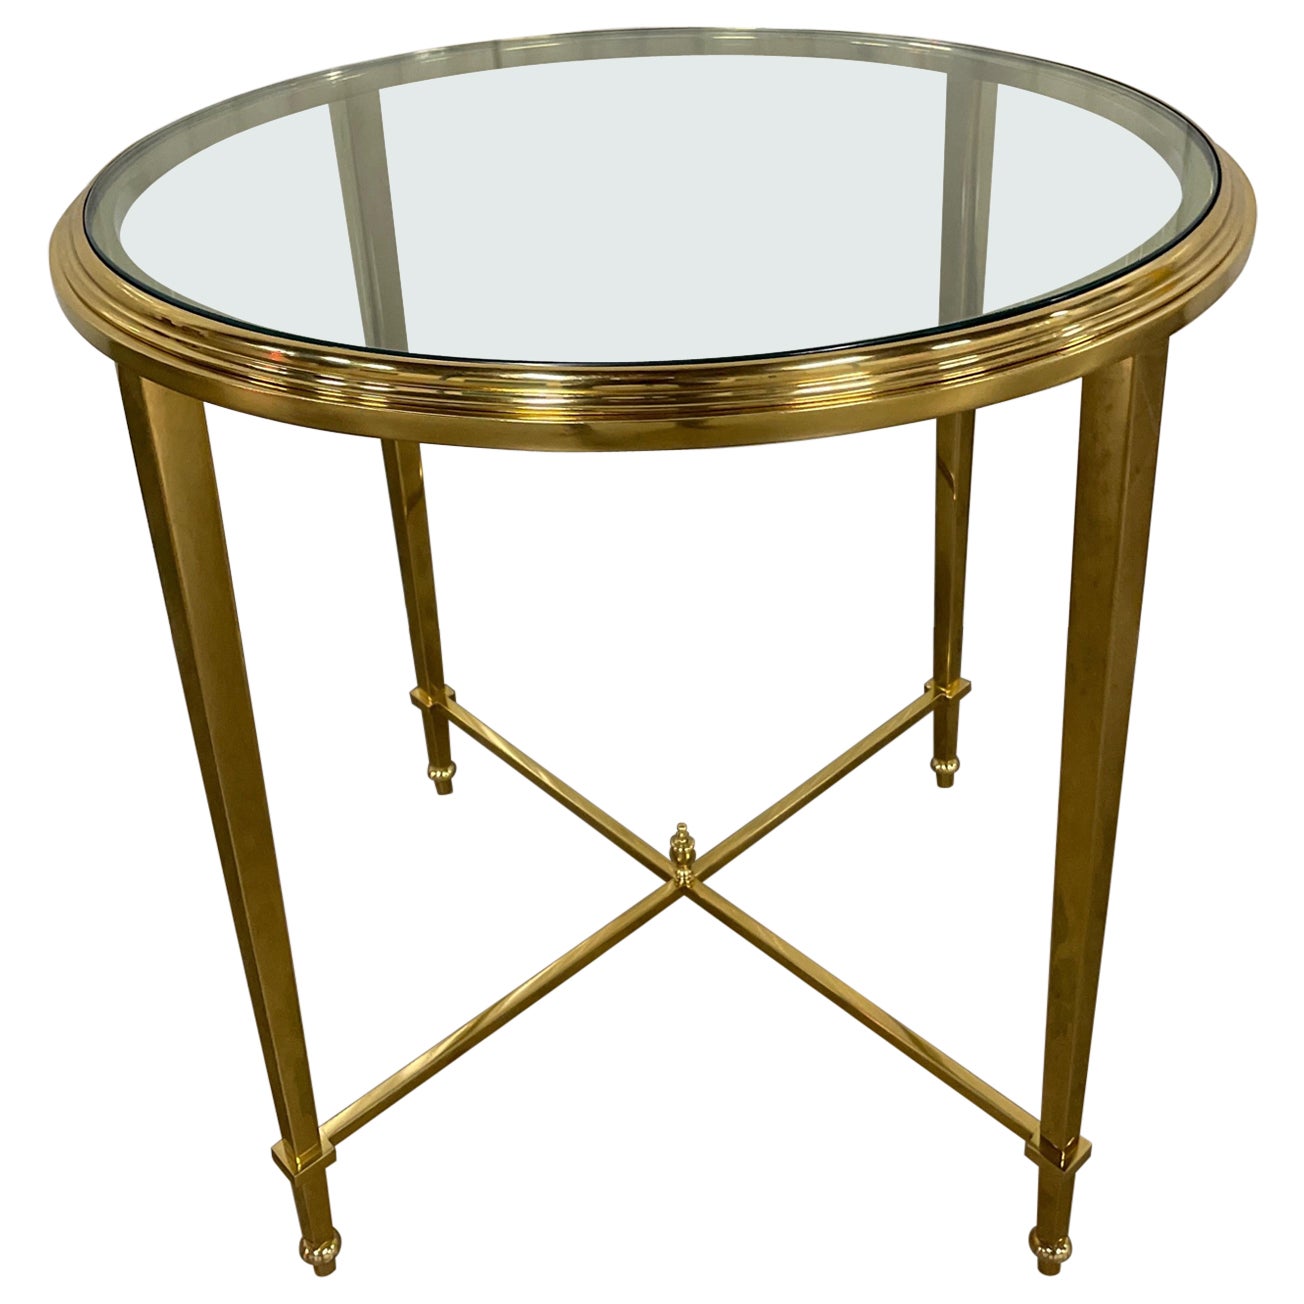 Round Neoclassical Solid Brass Side Table by Jansen